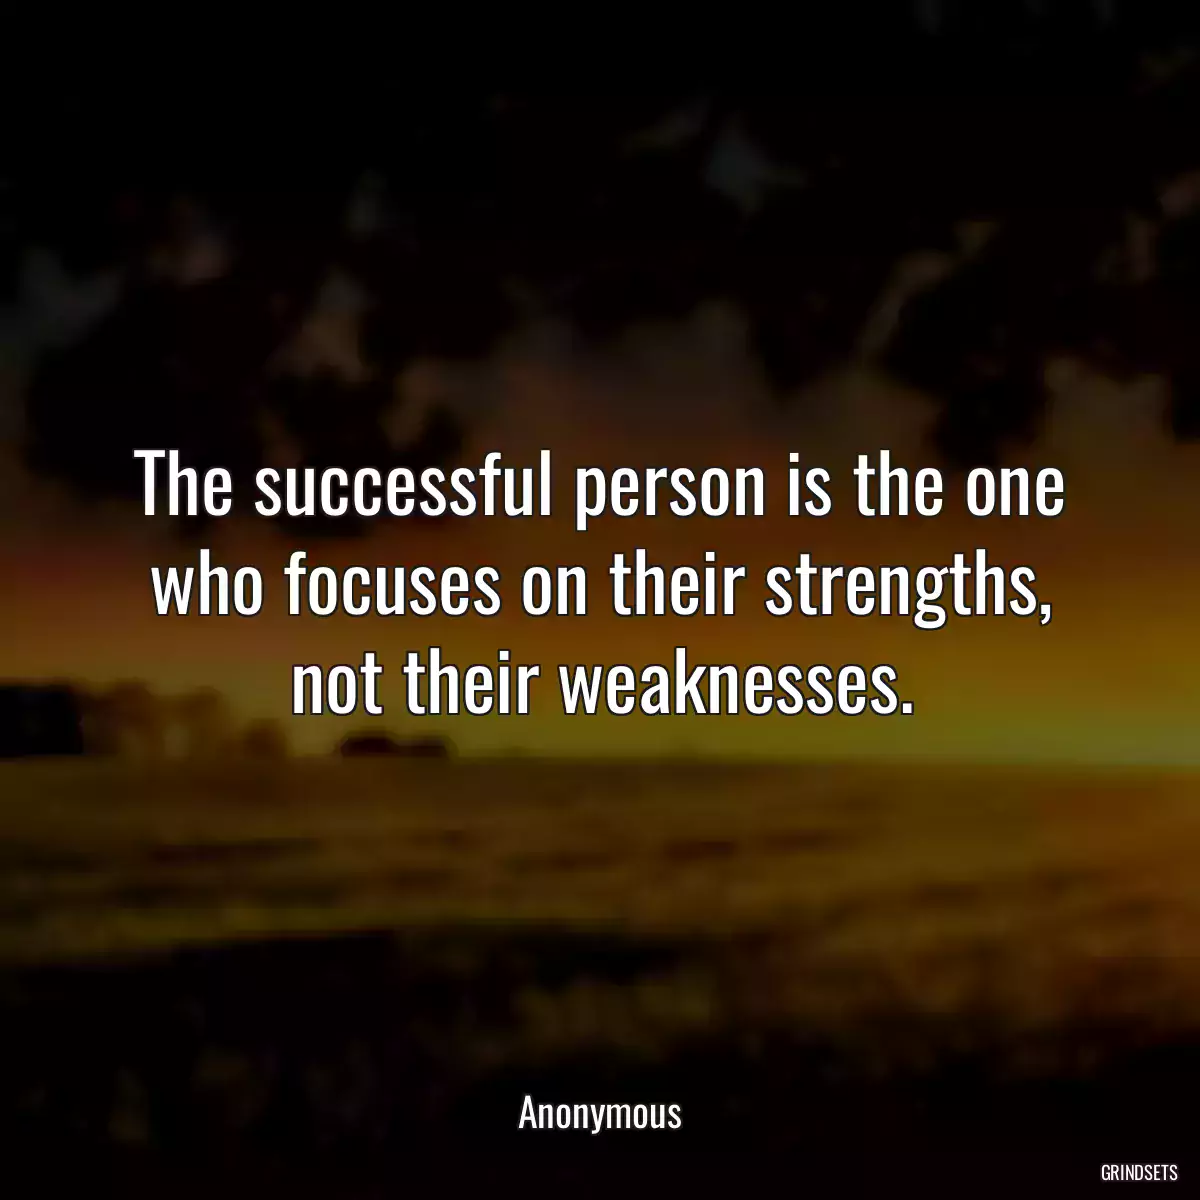 The successful person is the one who focuses on their strengths, not their weaknesses.